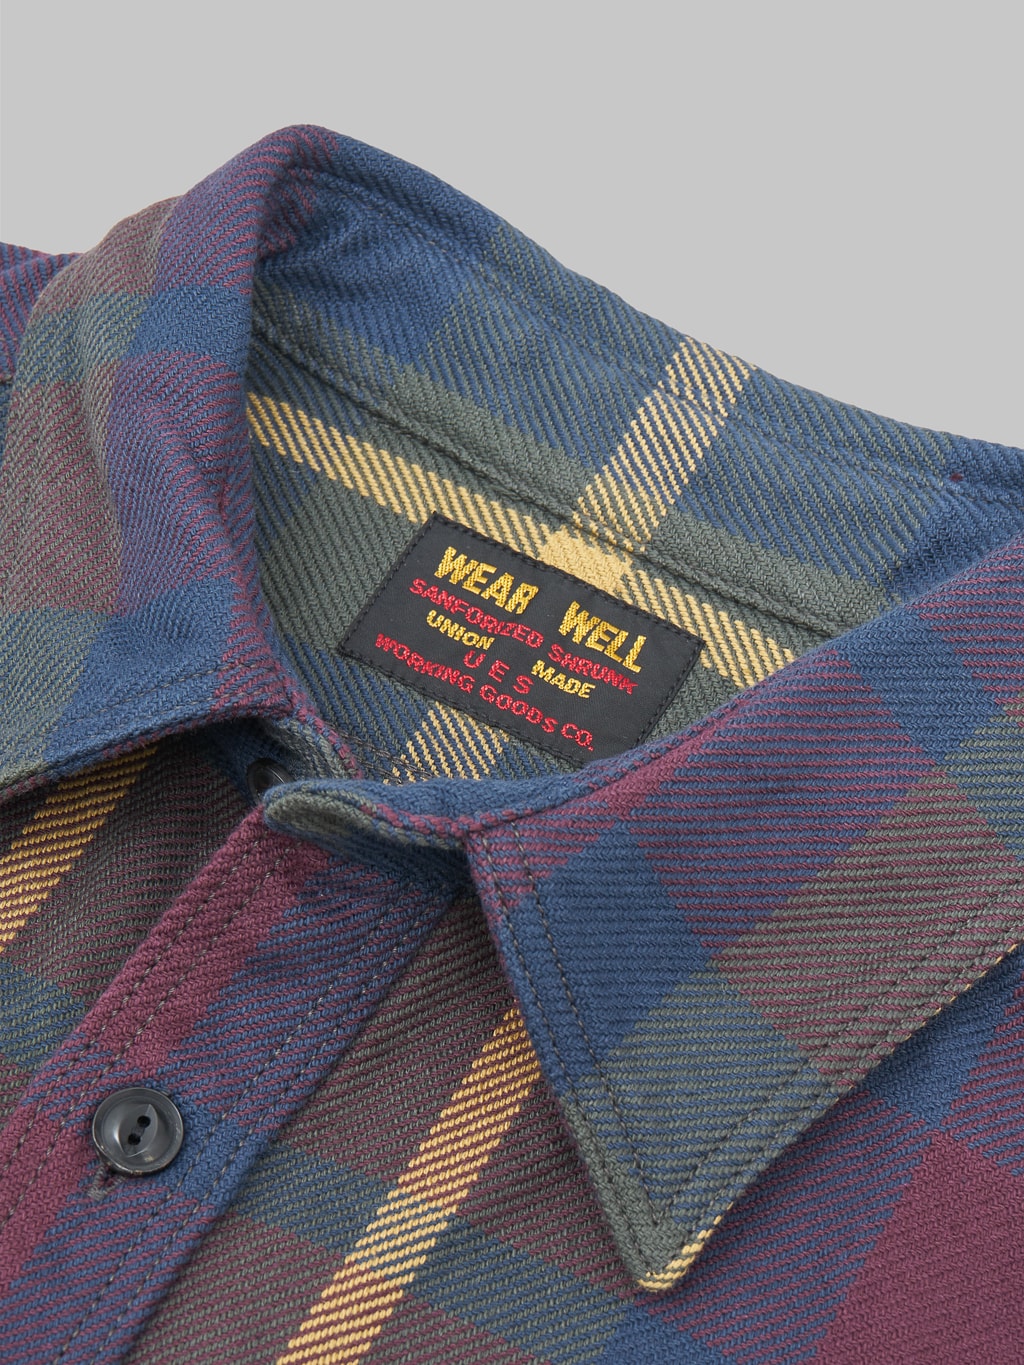 UES Extra Heavy Flannel Shirt wine interior tag